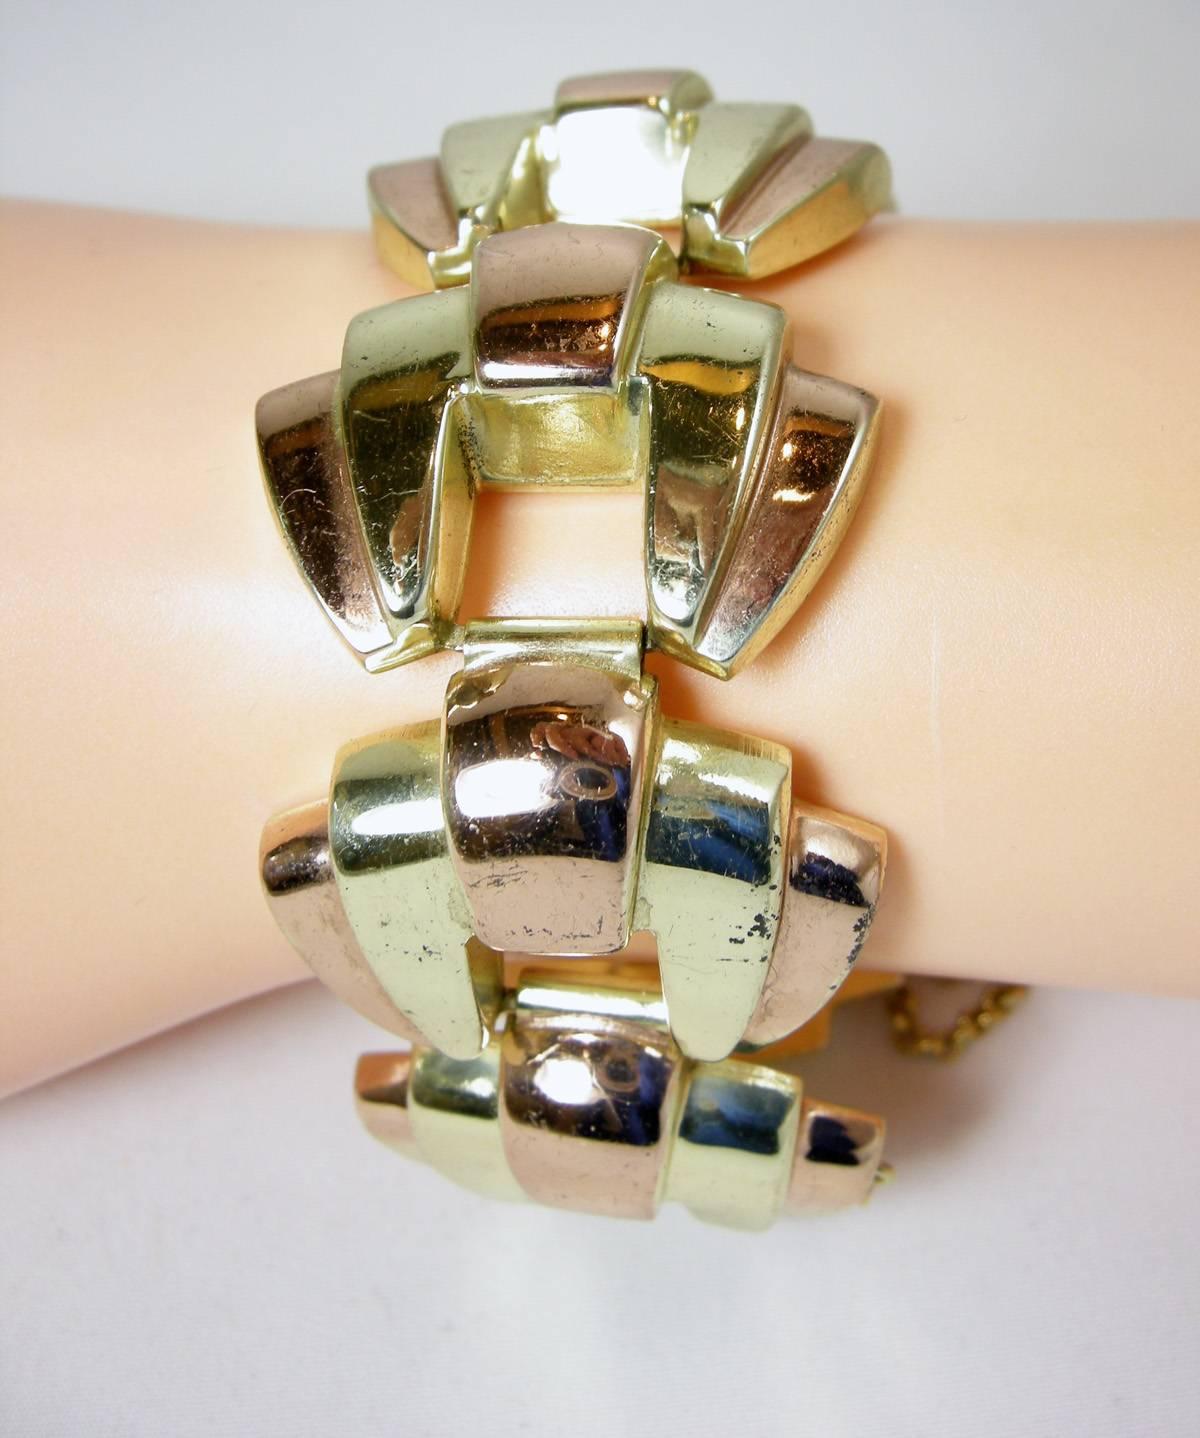 This vintage 1940s signed Monet bracelet features gold and white sterling silver in a large link design. It measures 7” x 1-1/4” with a slide-in clasp and a safety chain.  It is signed both “Monet” and “Sterling” and is in excellent condition. 
